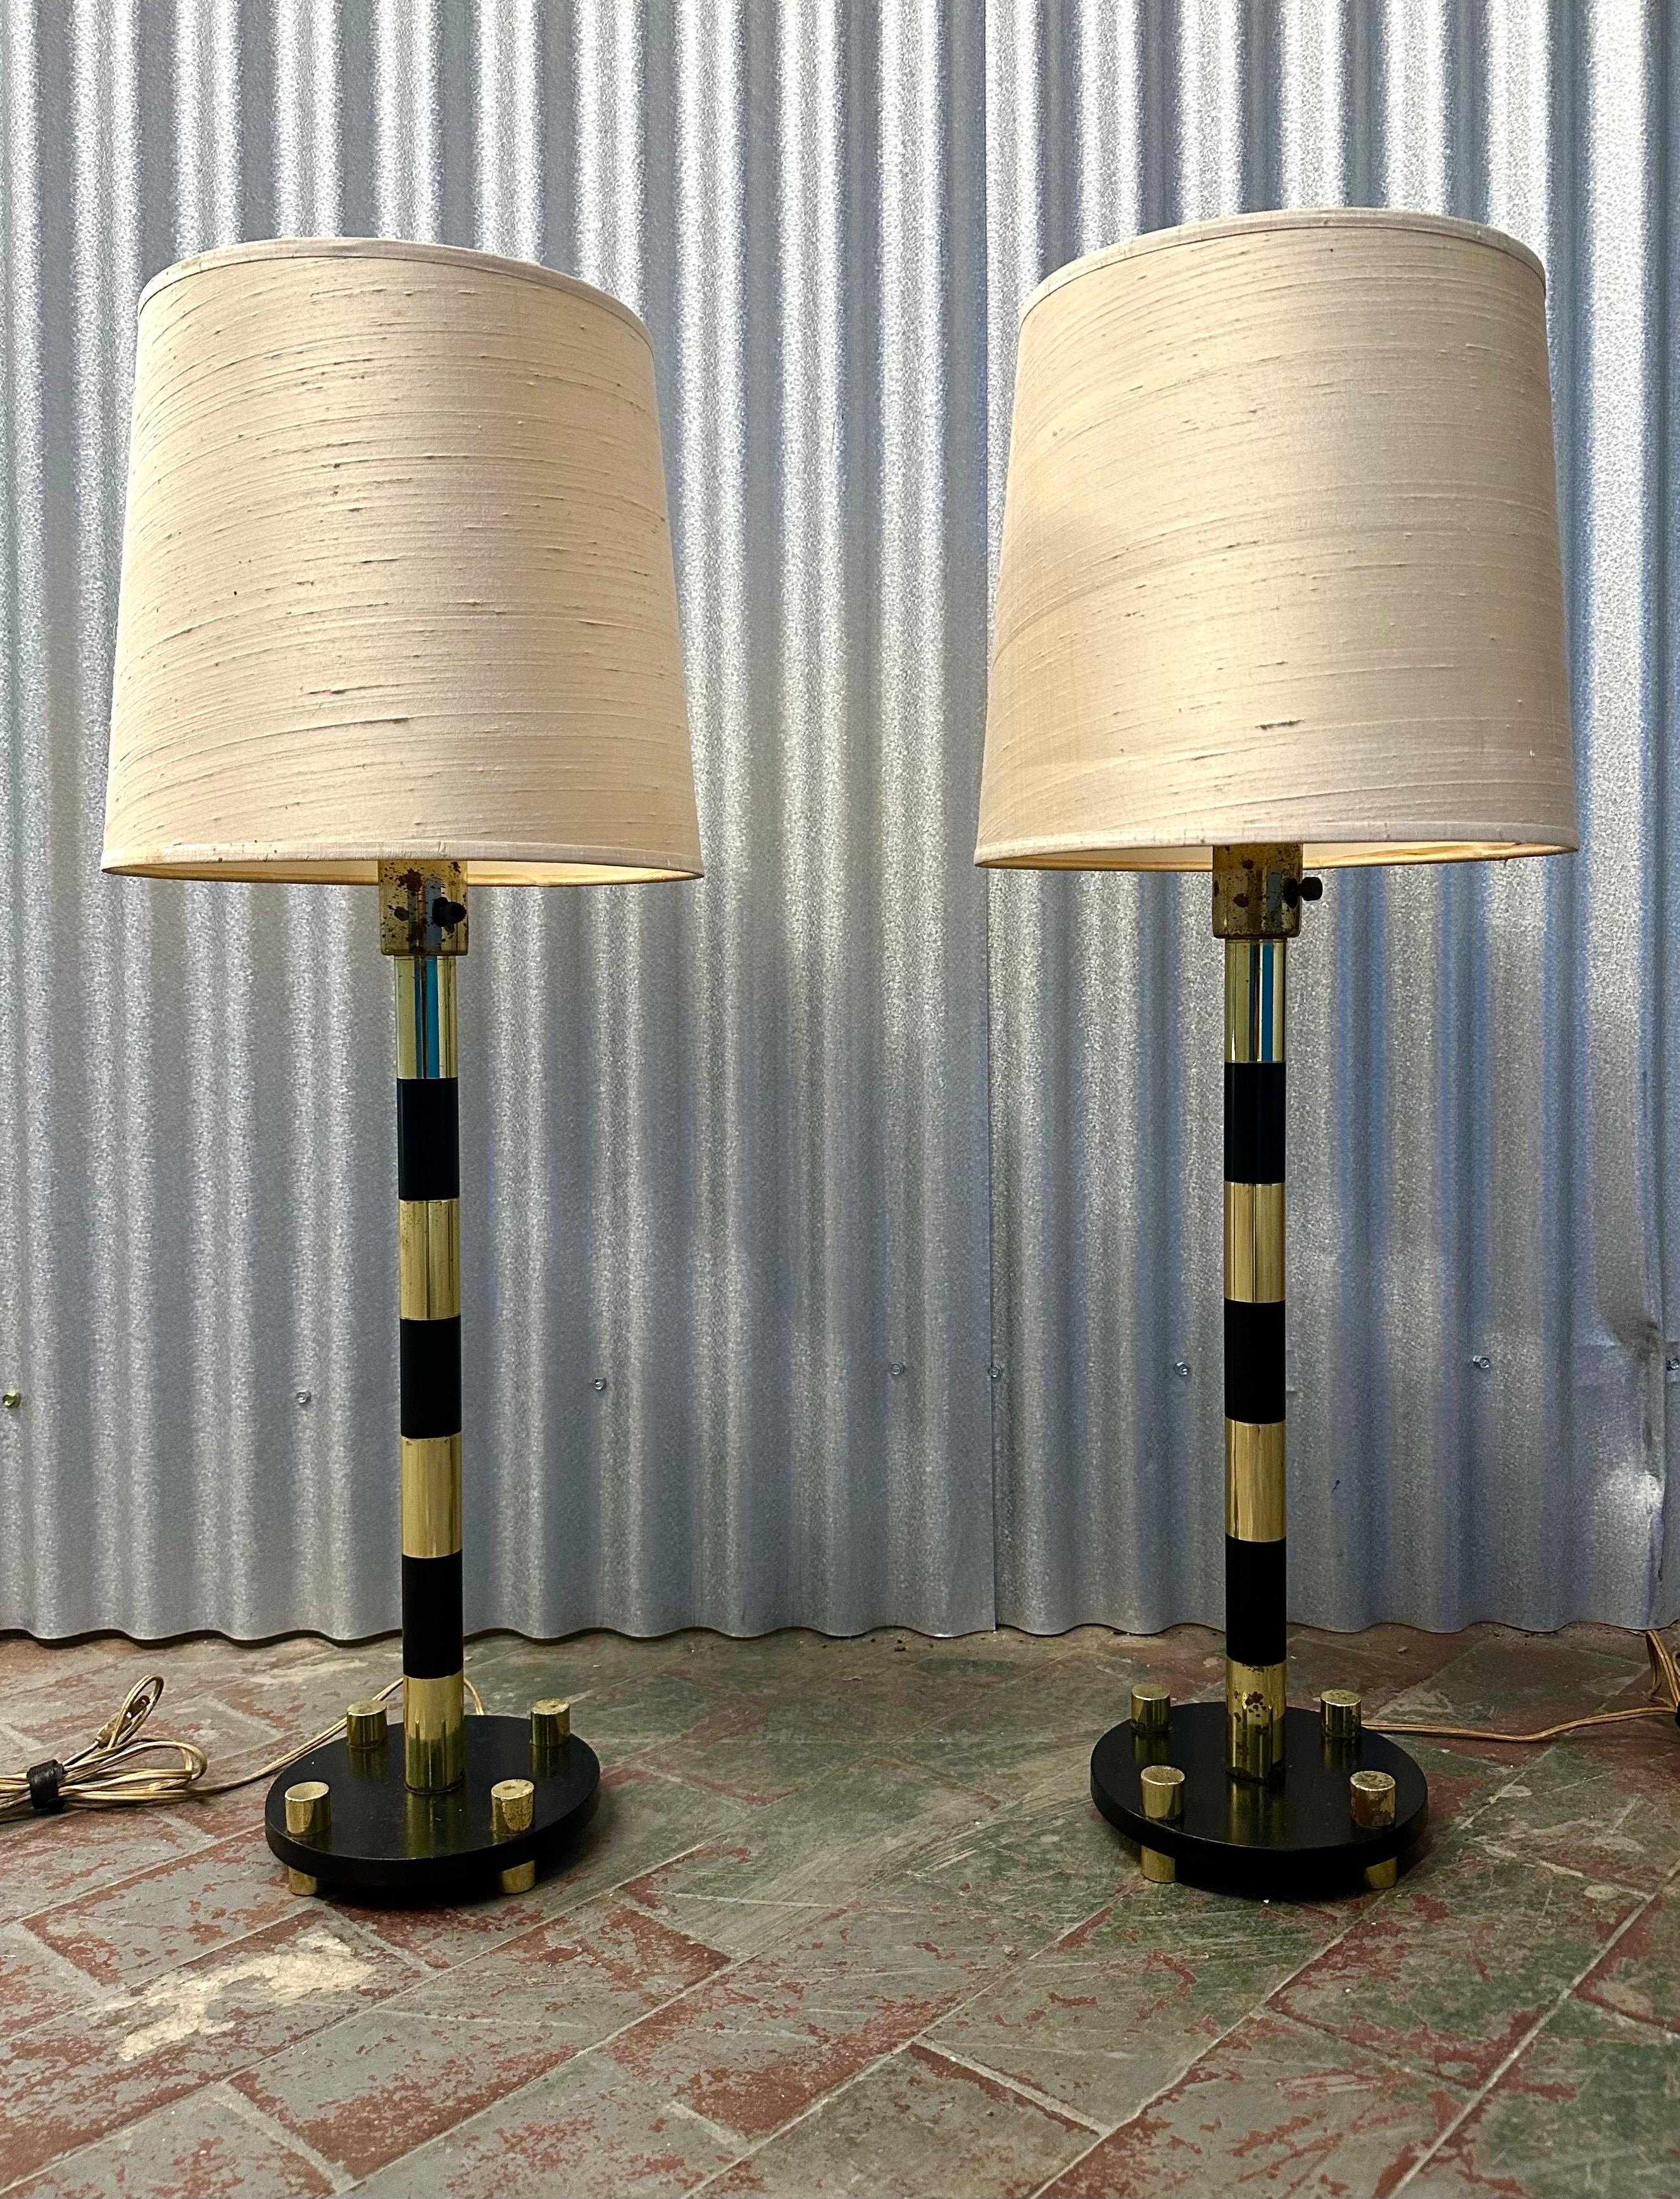 The stem and base are comprised of alternating polished brass and black enameled brass bands. 

An elegant design with a slightly Space Age feel. Wired with a single upright socket. Sold without shades, but sample pair may be available.